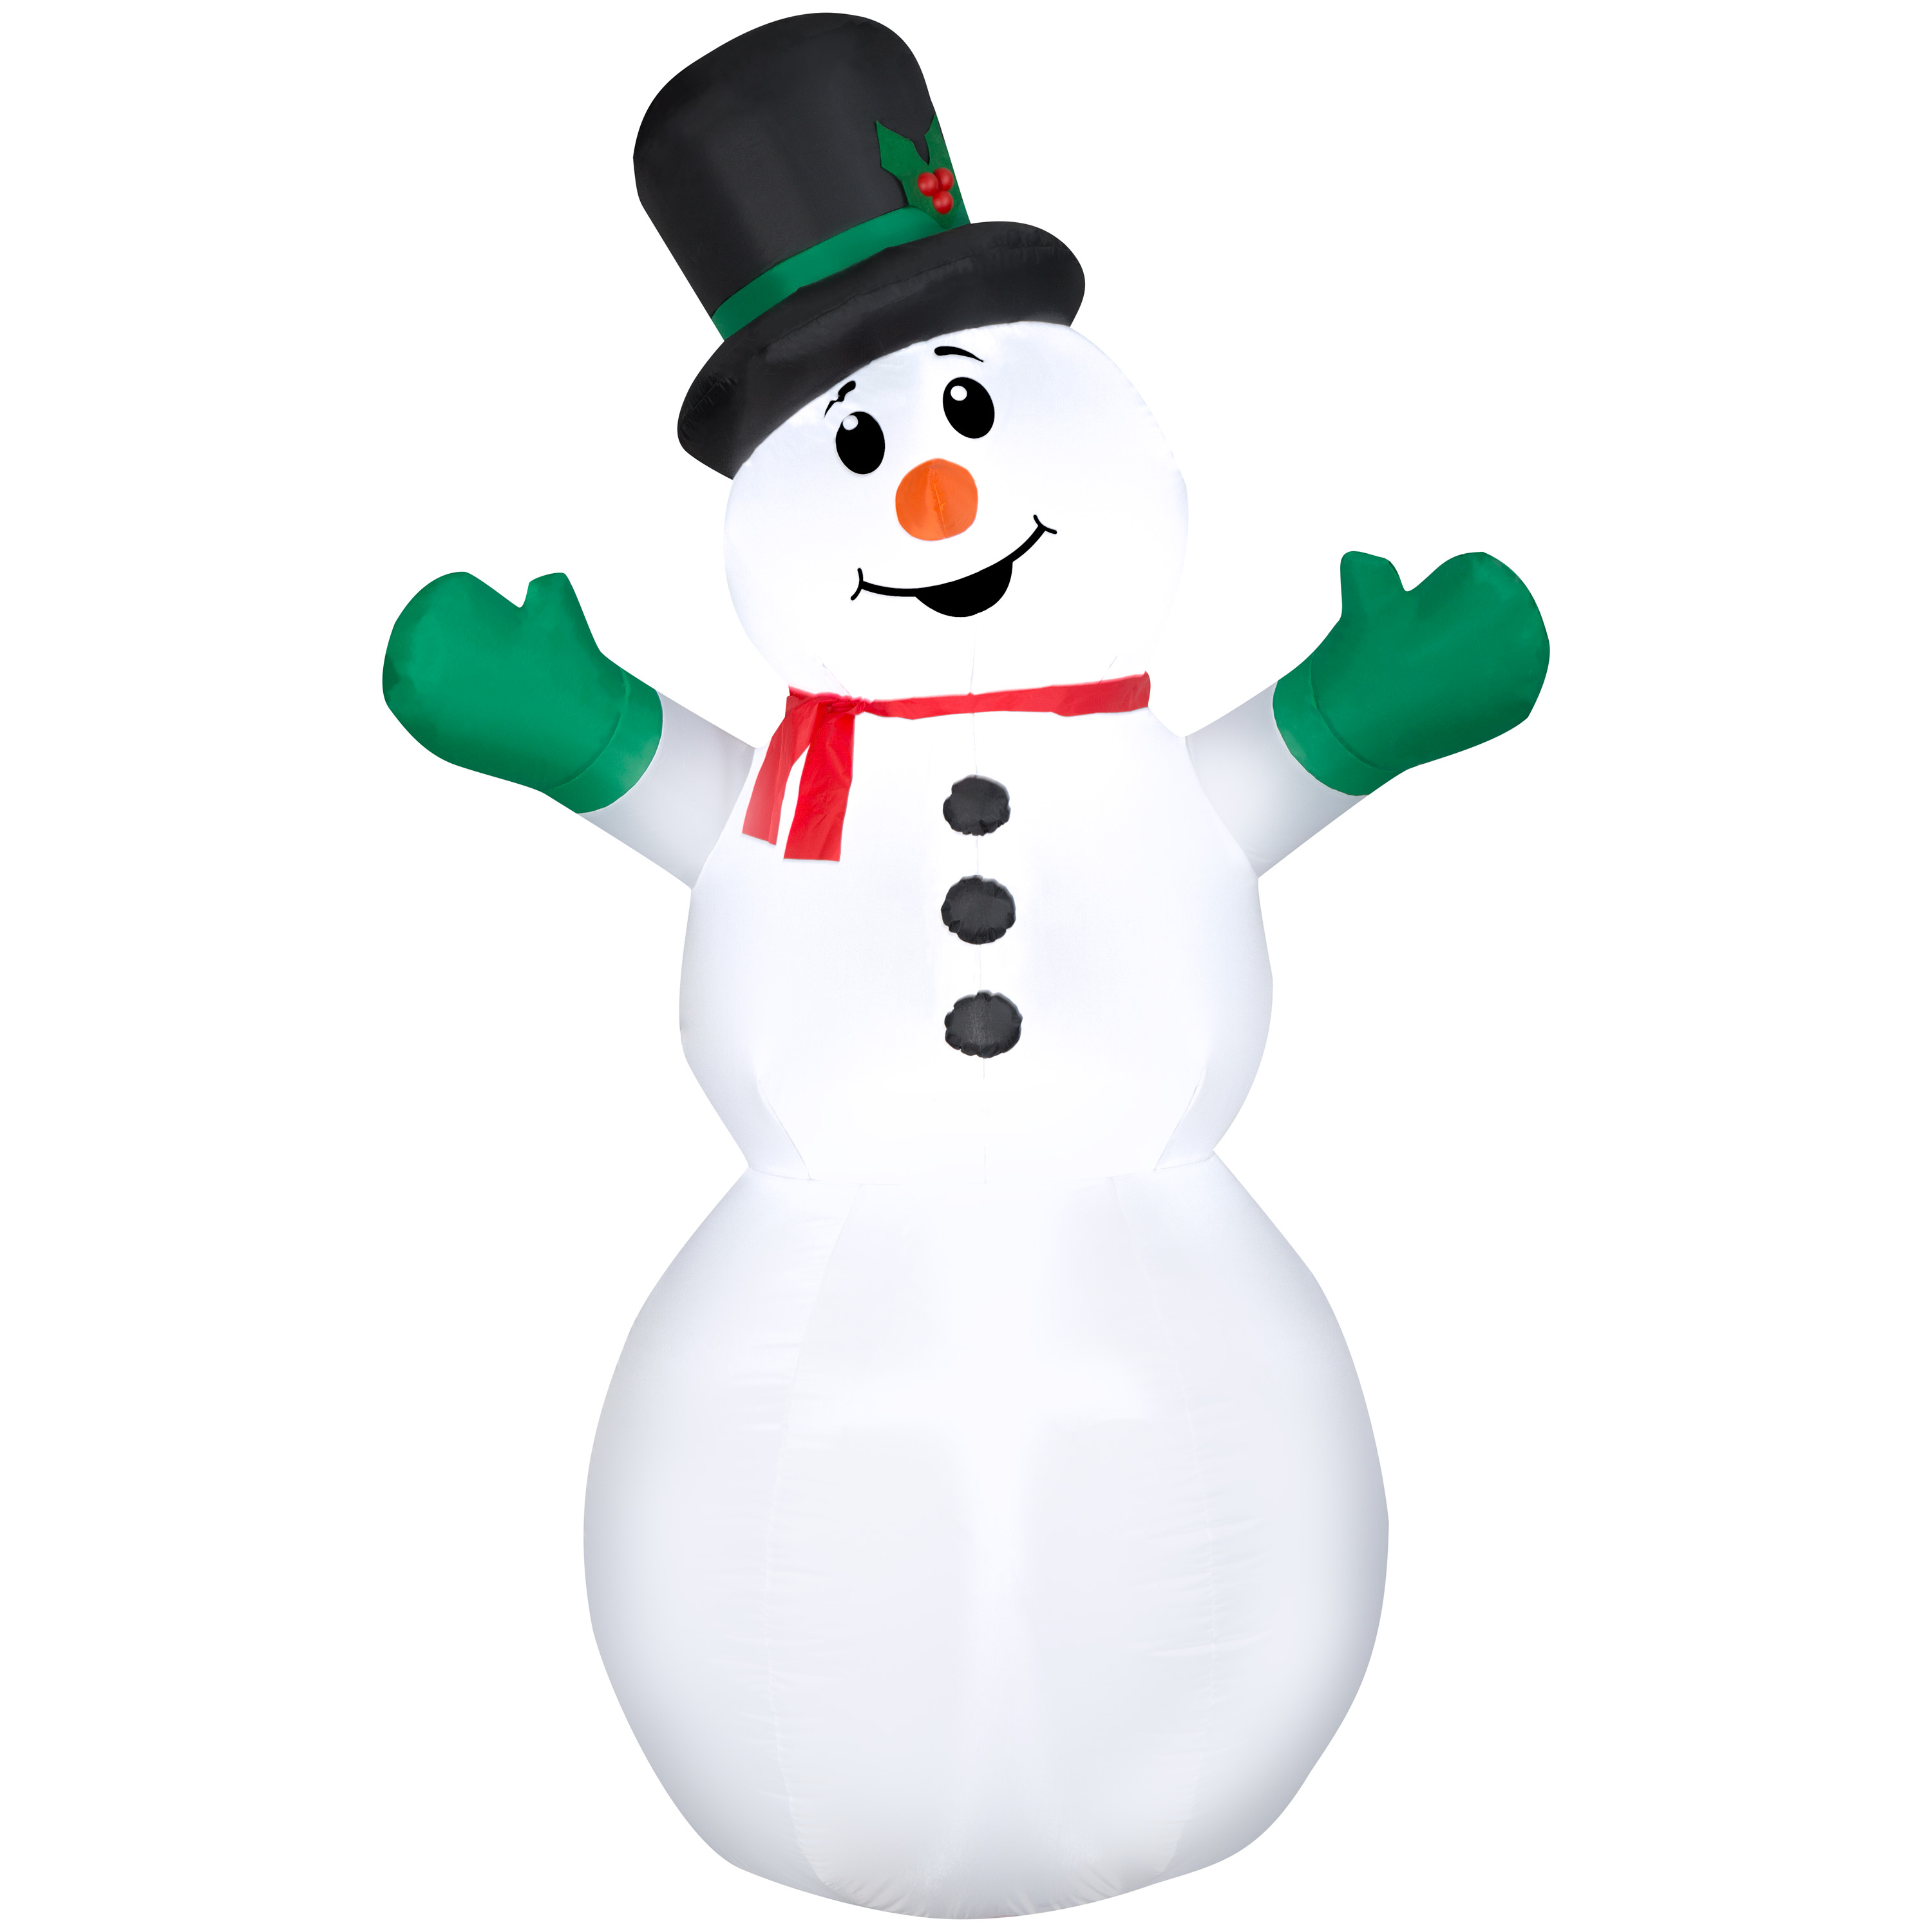 Airblown Inflatables Large Snowman, 9 Feet Tall - image 1 of 6